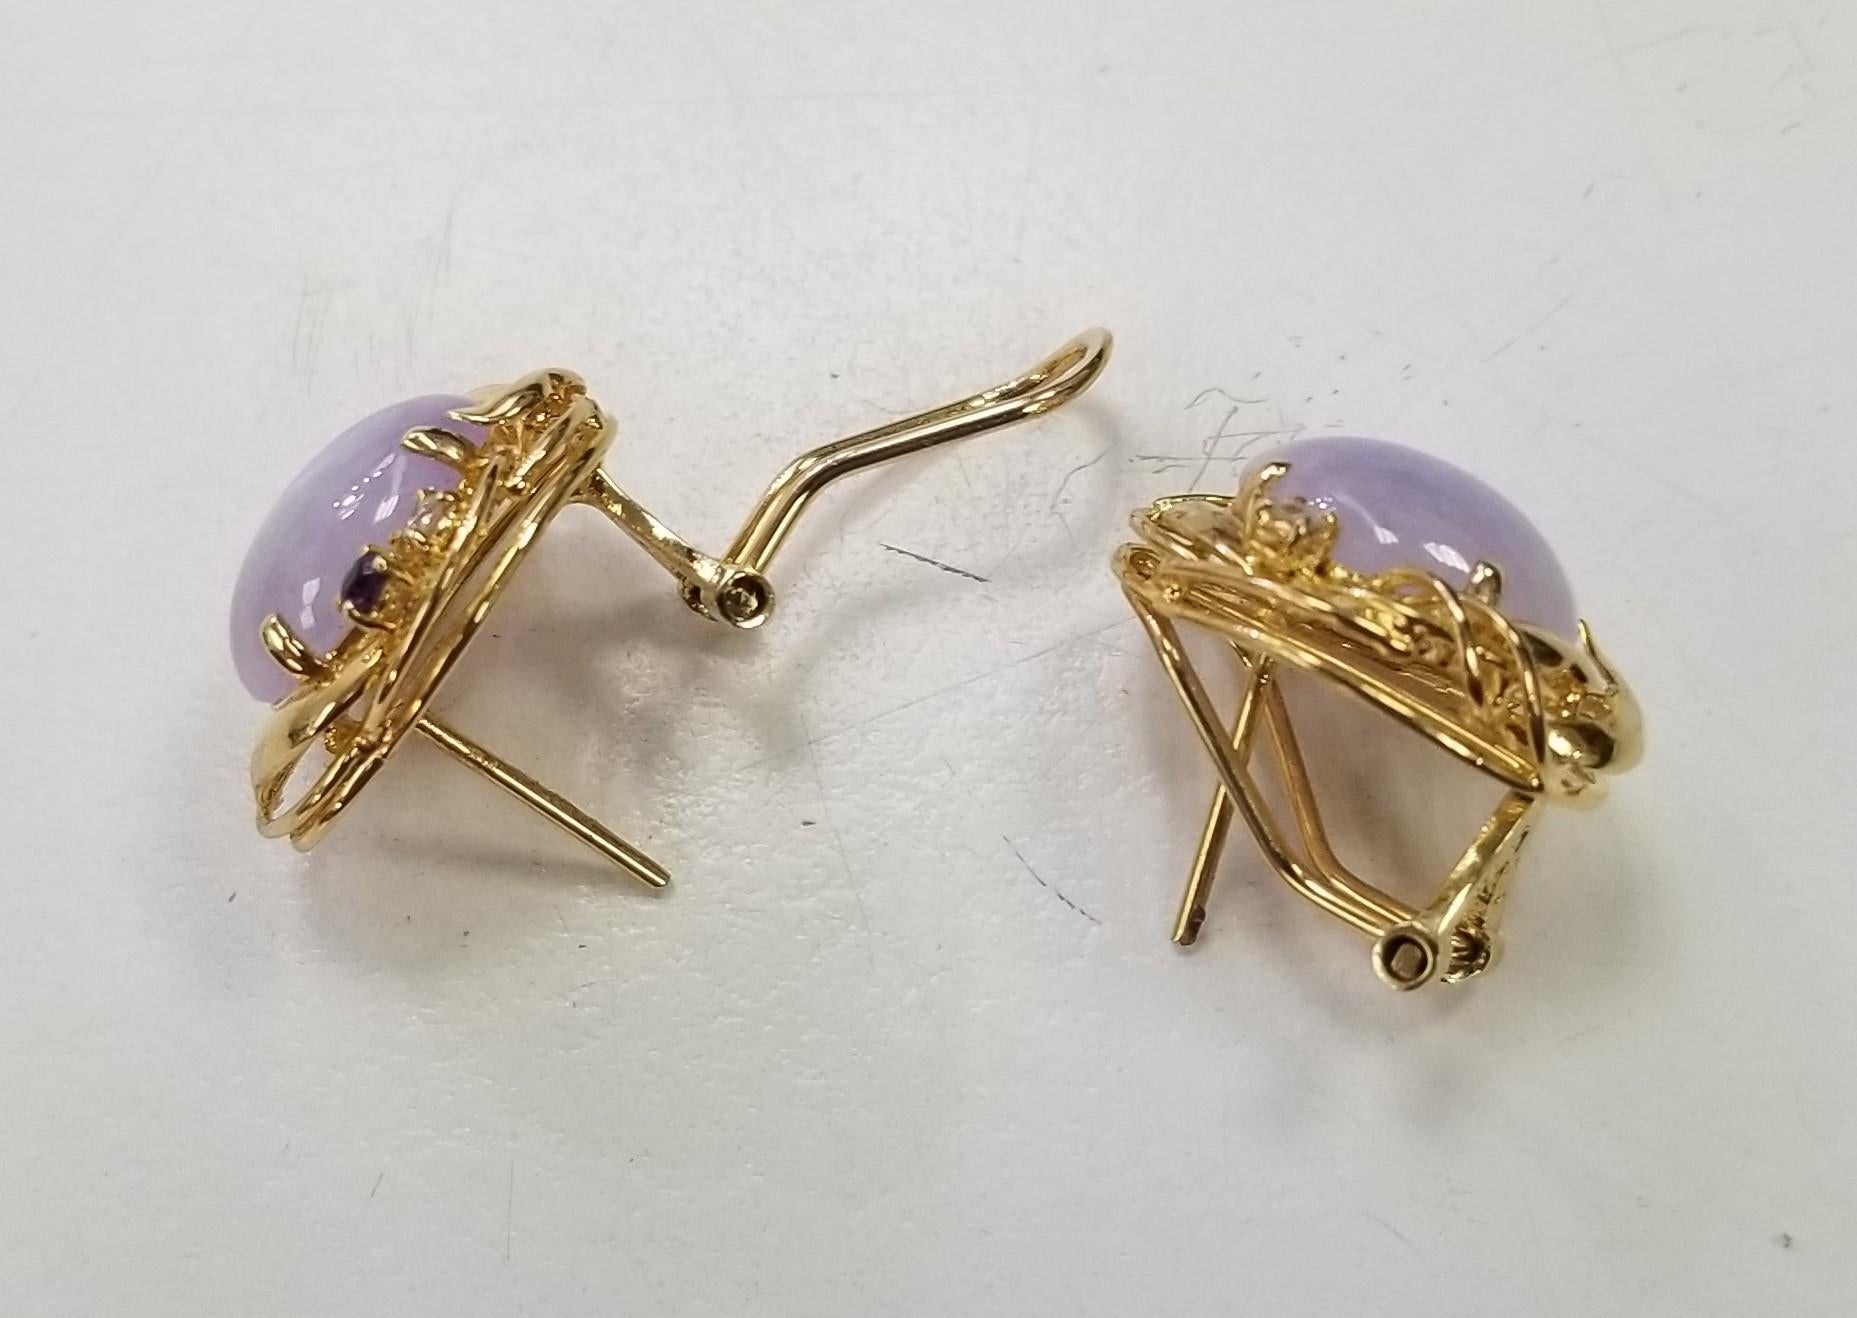 A fine pair of gold & jade earrings.
In 14k yellow gold.
Prong-set with oval shaped purple lavender jade cabochons (likely enhanced).
Set with omega clips for additional security.

Simply wonderful jade earrings!
Seller Notes: “IN VERY GOOD